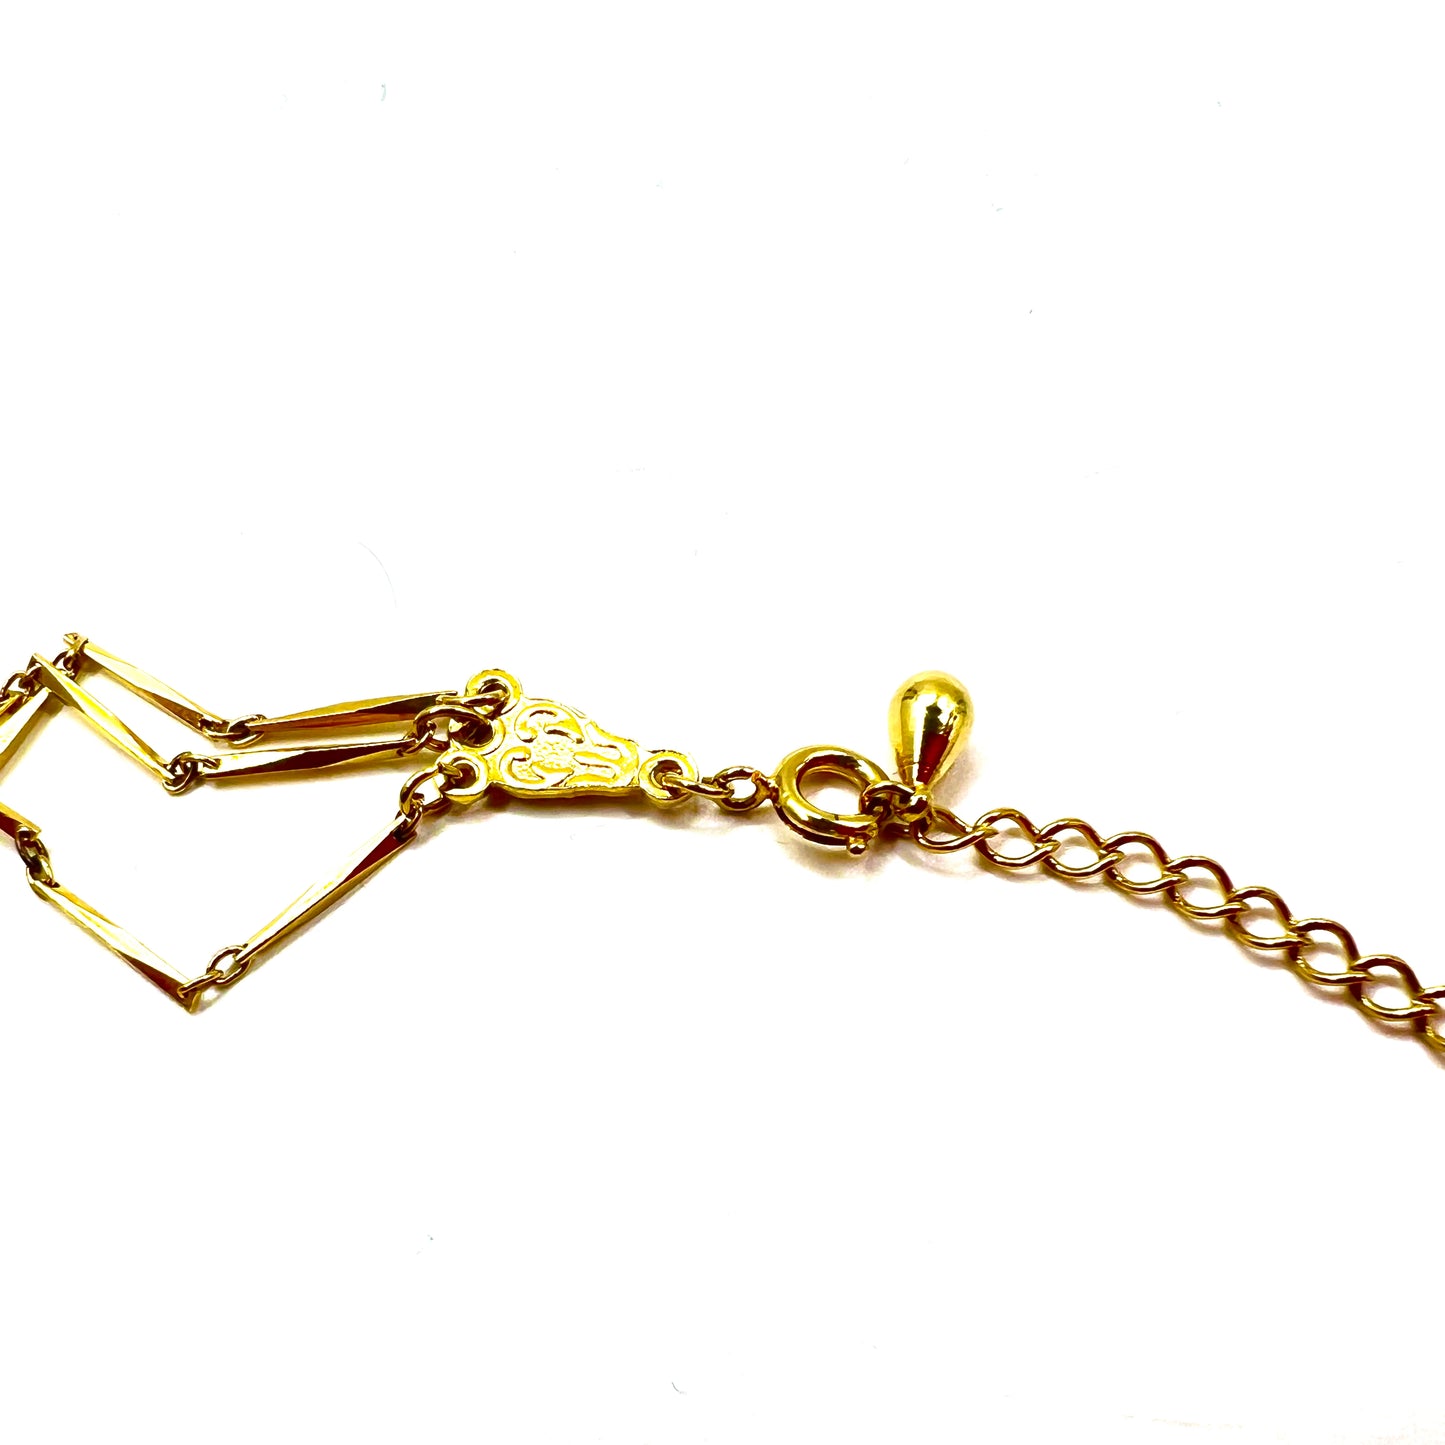 Vintage Gold Necklace 3連 ネックレス 切子チェーン ゴールド ヴィンテージ